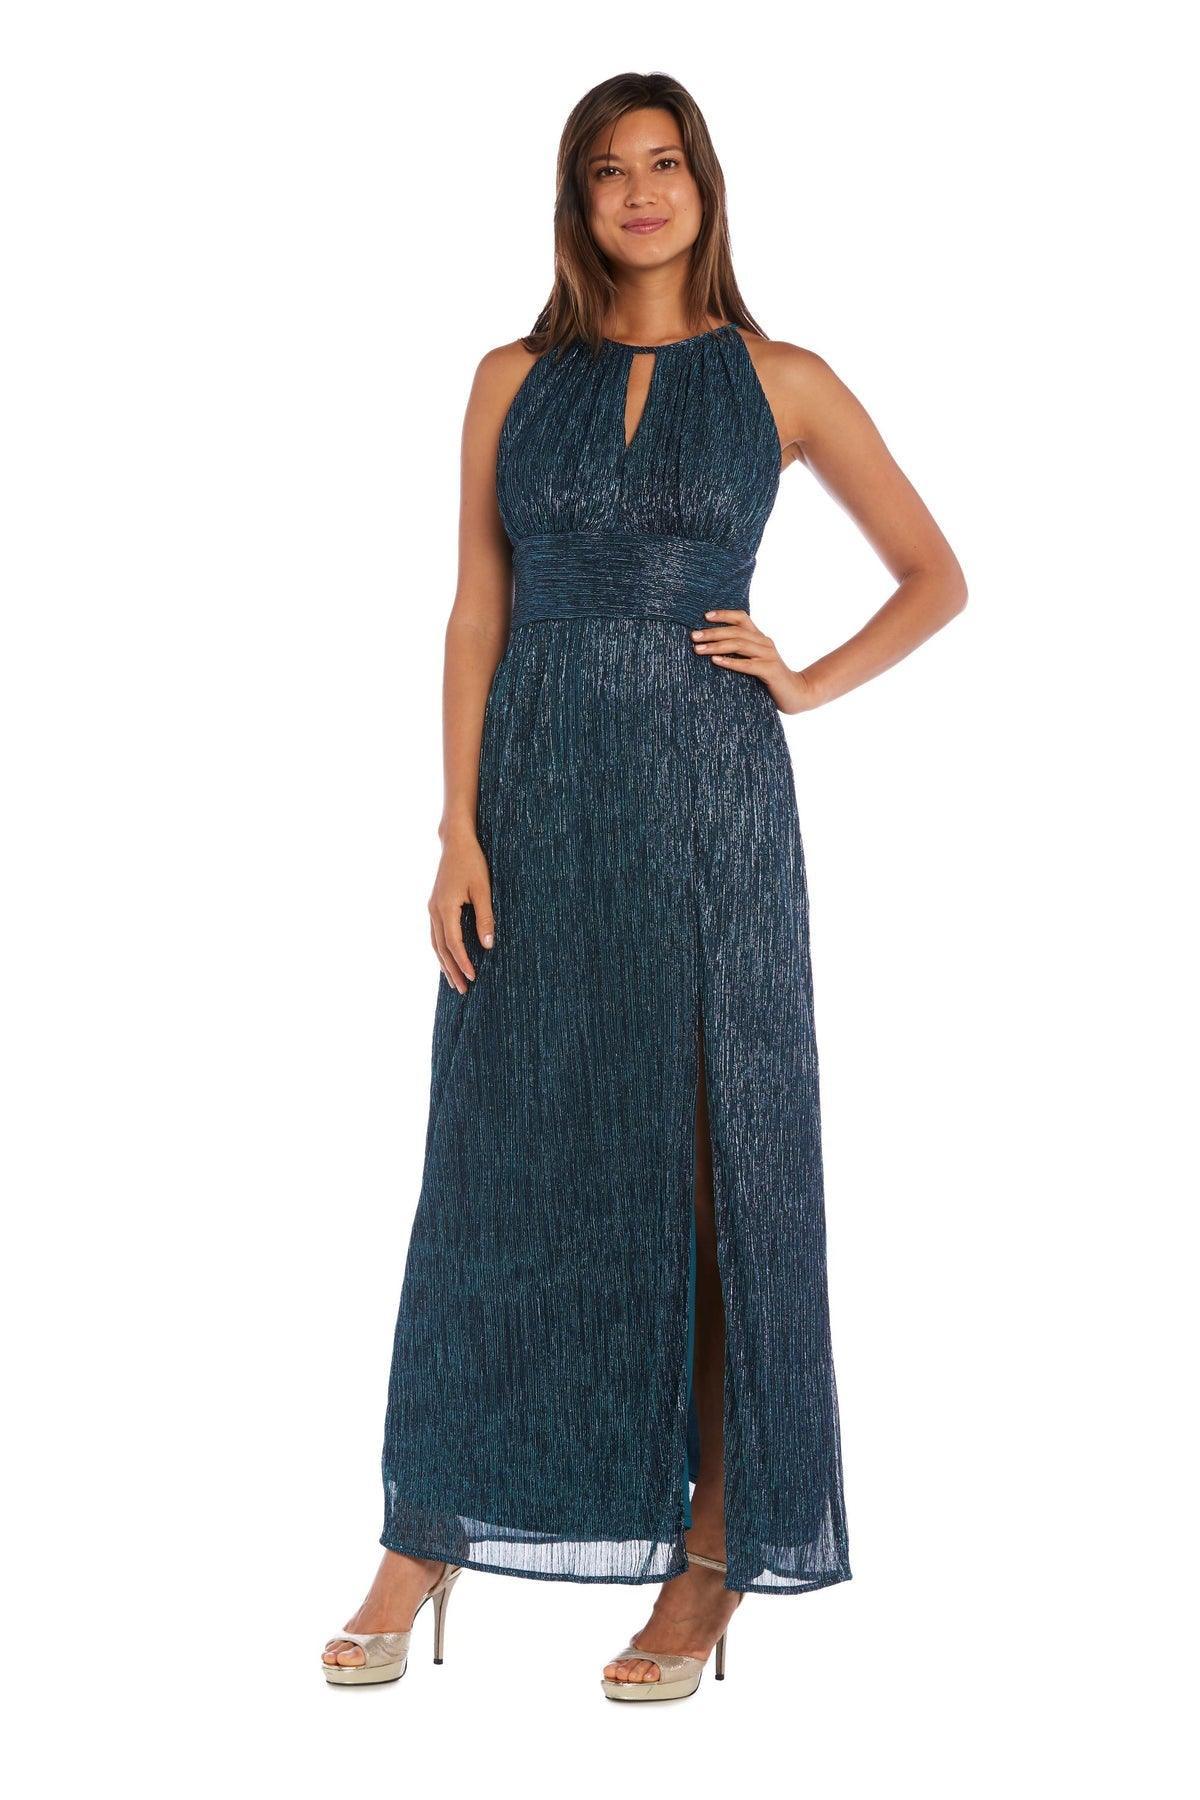 R&M Richards Long Formal Petite Metallic Gown Sale - The Dress Outlet